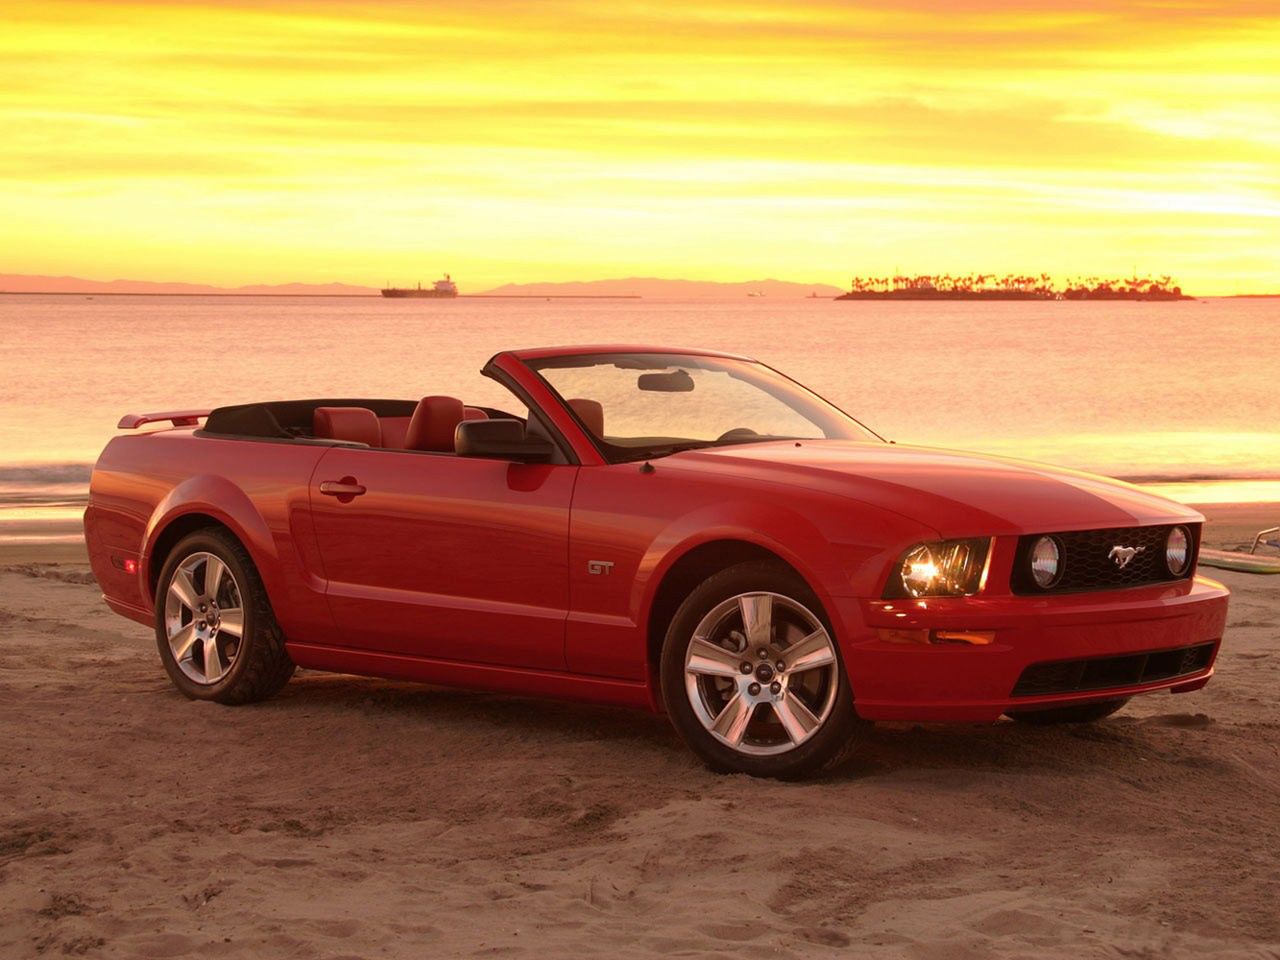 2005 Ford Mustang GT Cabrio (fot. autokult.pl)